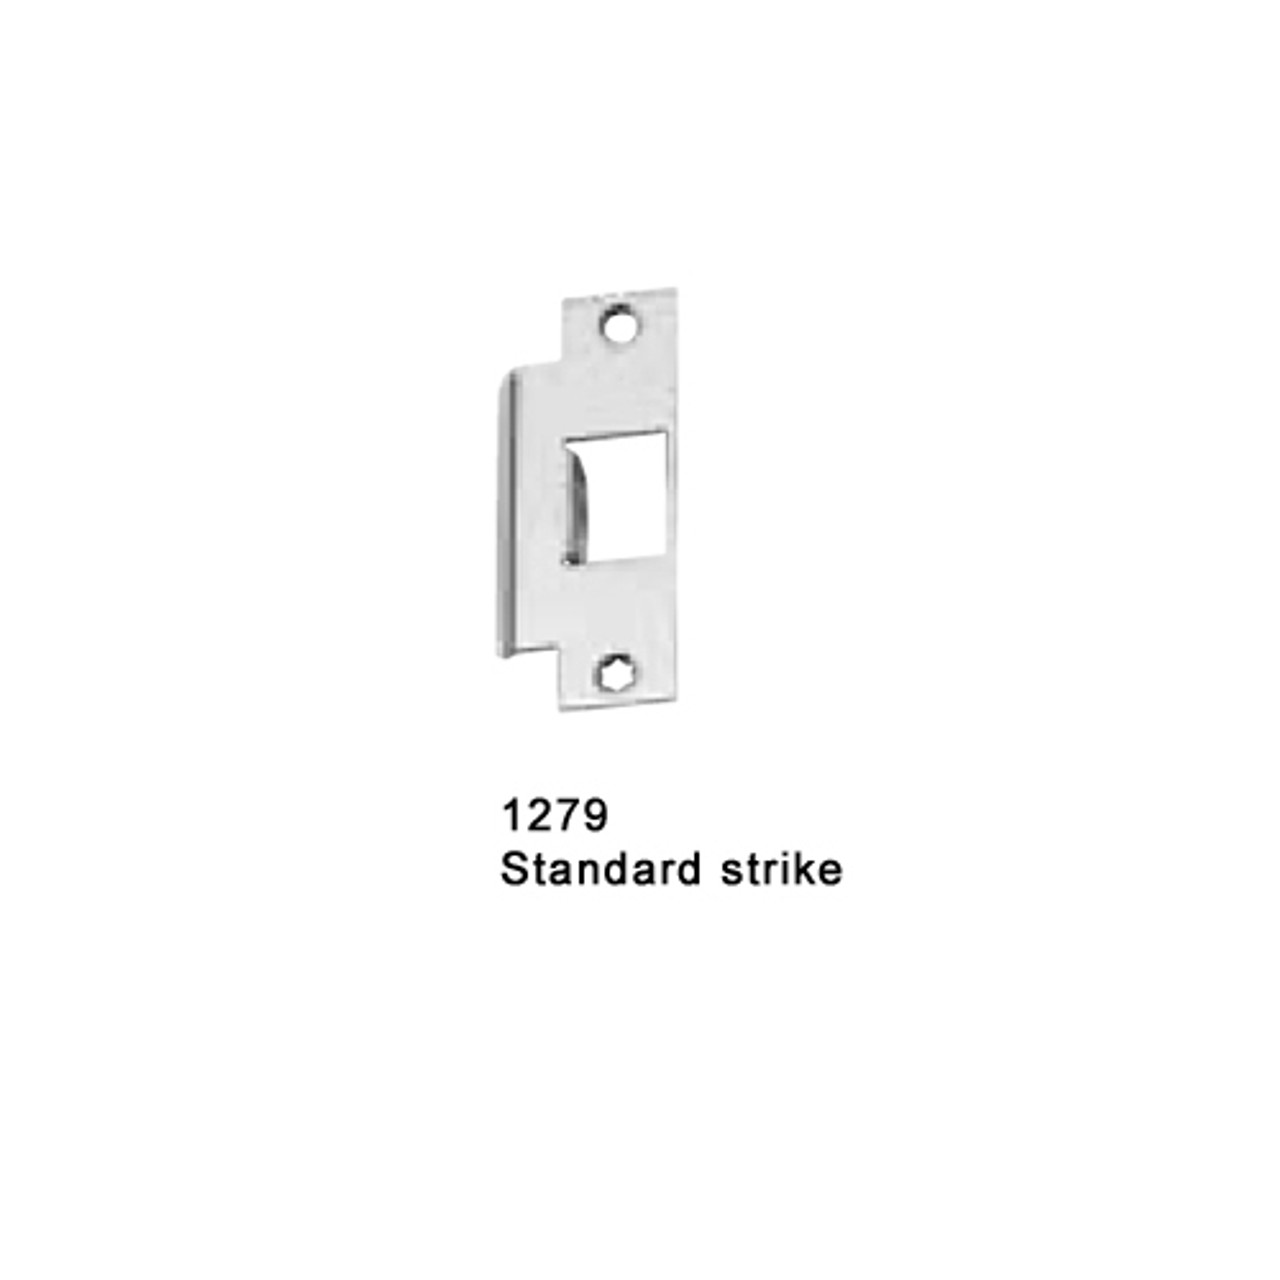 F-25-M-L-BE-Dane-US10-4-LHR Falcon 25 Series Fire Rated Mortise Lock Devices 510L-BE Dane Lever Trim with Blank Escutcheon in Satin Bronze